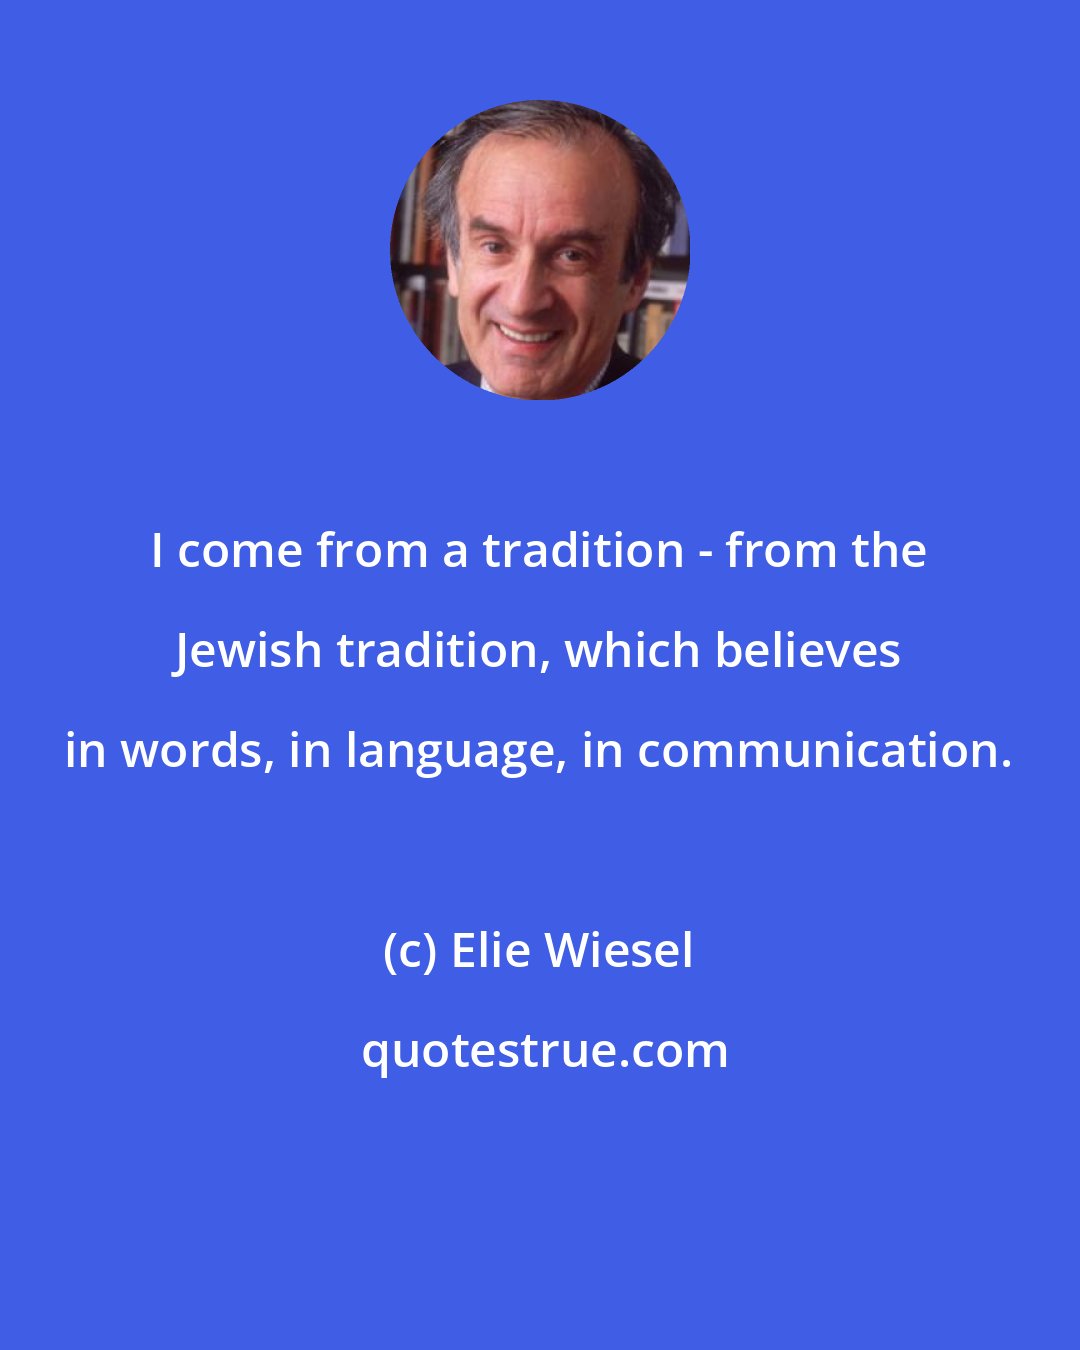 Elie Wiesel: I come from a tradition - from the Jewish tradition, which believes in words, in language, in communication.